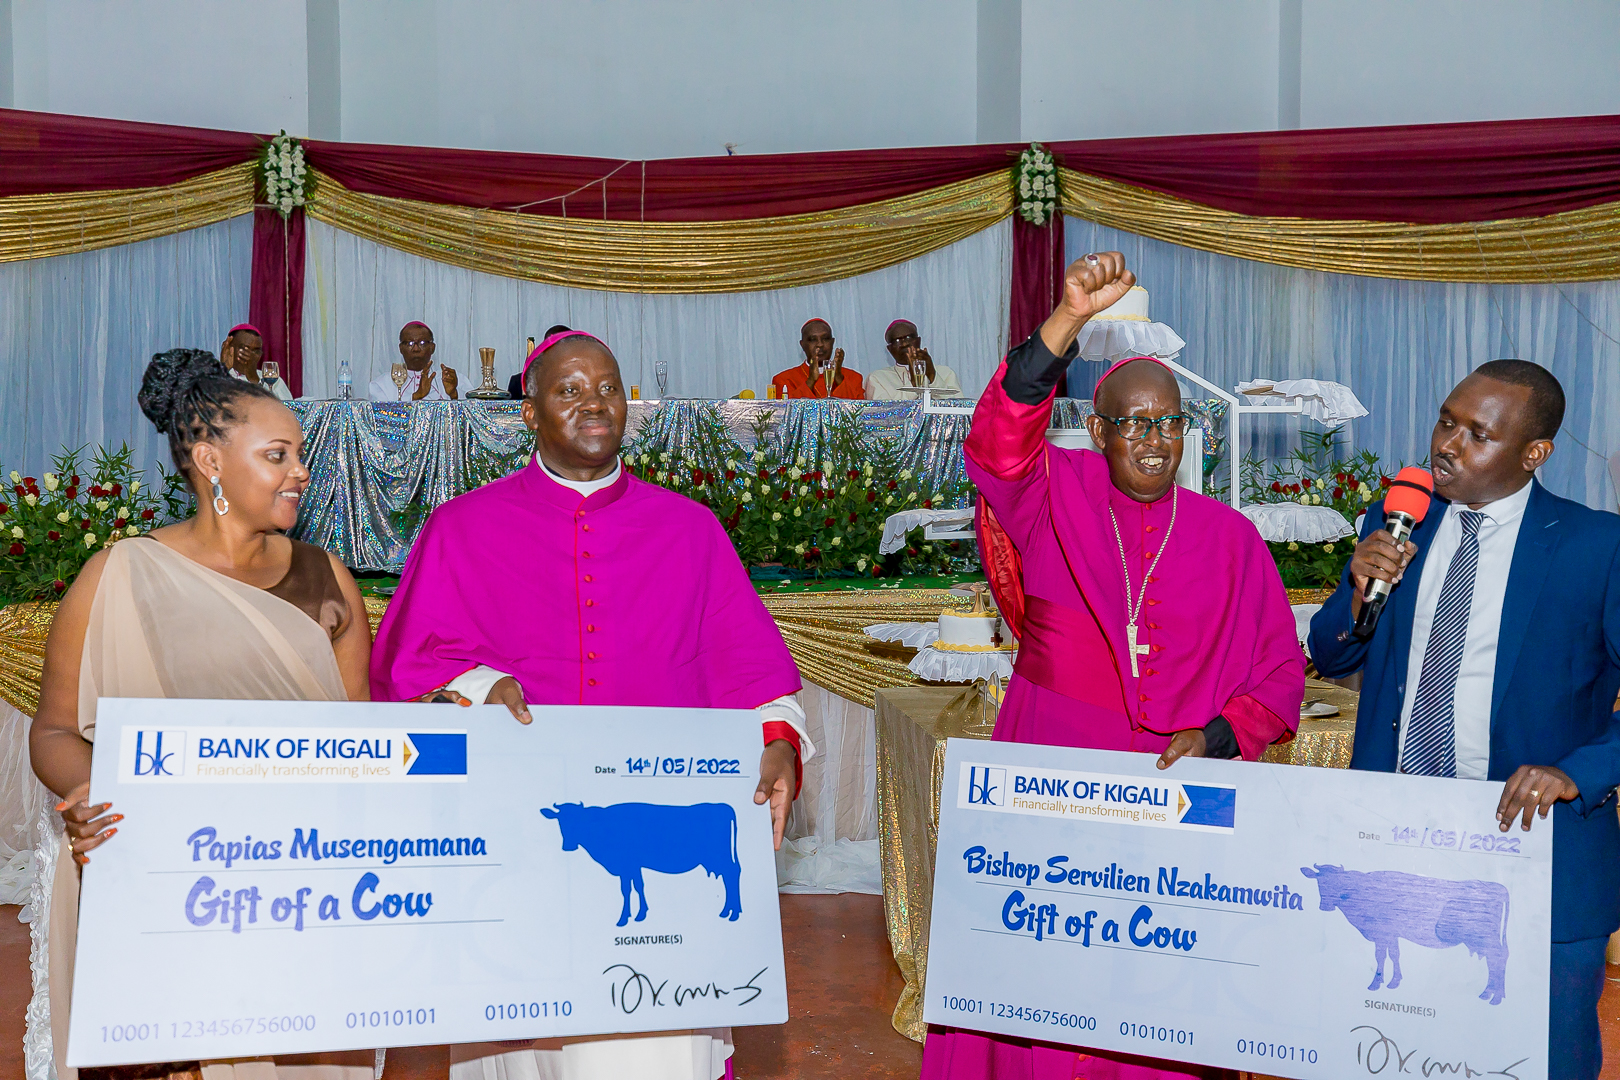 Bank of Kigali Group Plc (BK) has gifted cows to the former Bishop of Byumba Catholic Diocese, Servilien Nzakamwita and the newly consecrated Bishop Papias Musengamana as the symbol of the partnership between BK and Diocese.